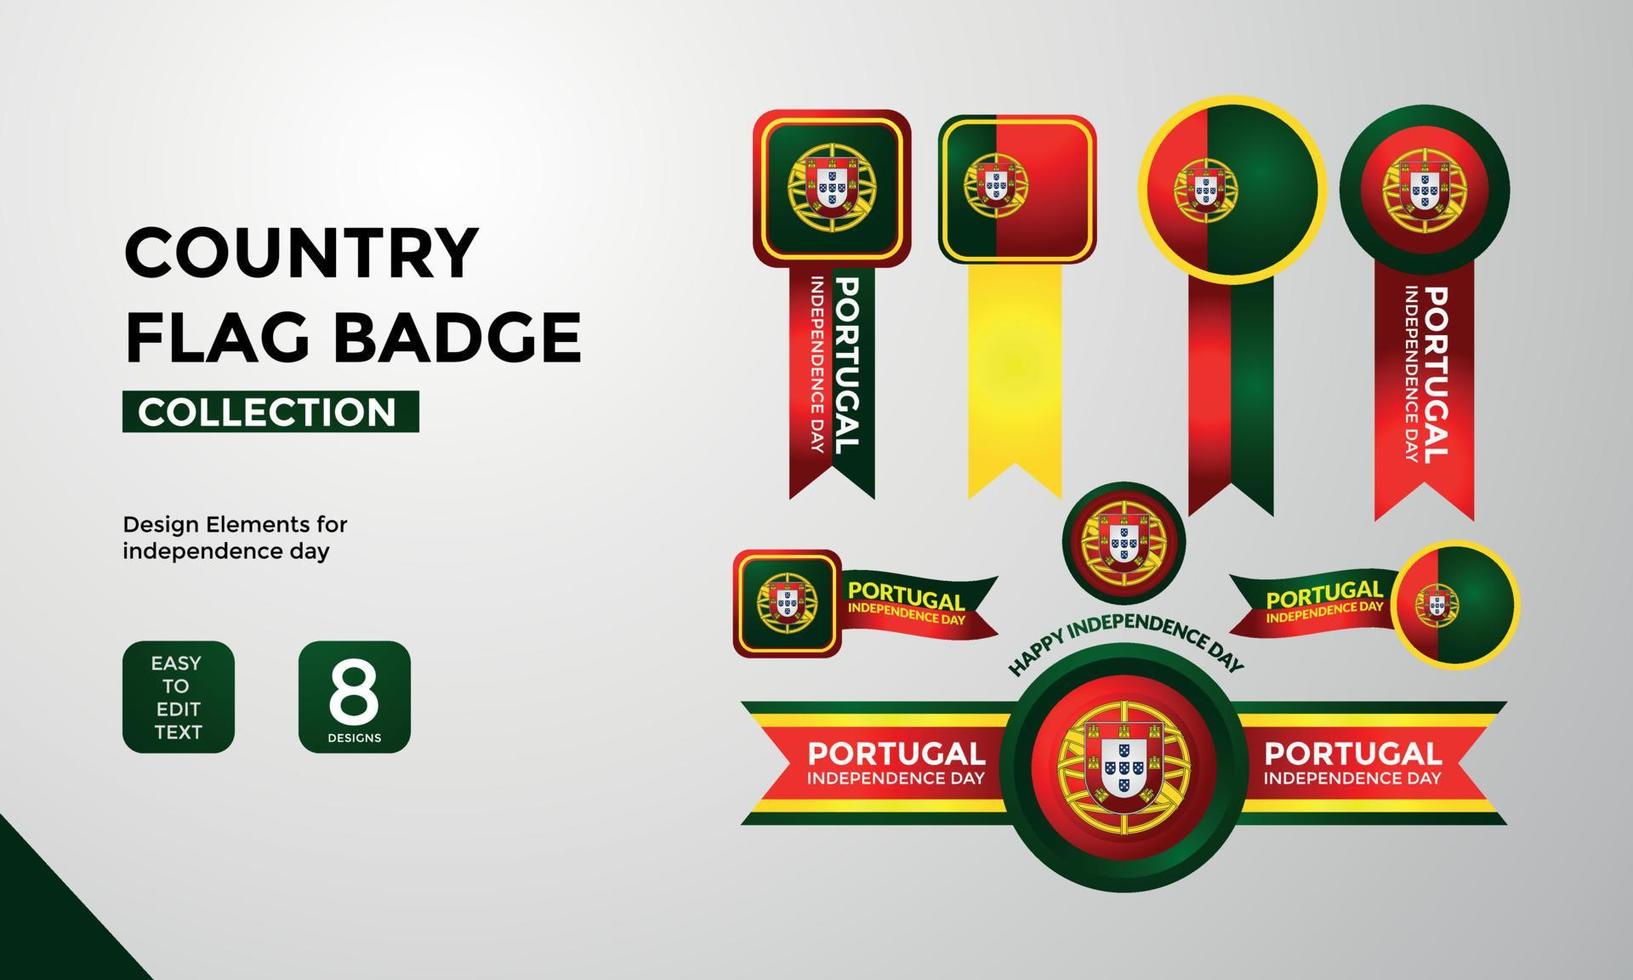 Portugal flag badge collection, Happy Independence Day greetings vector